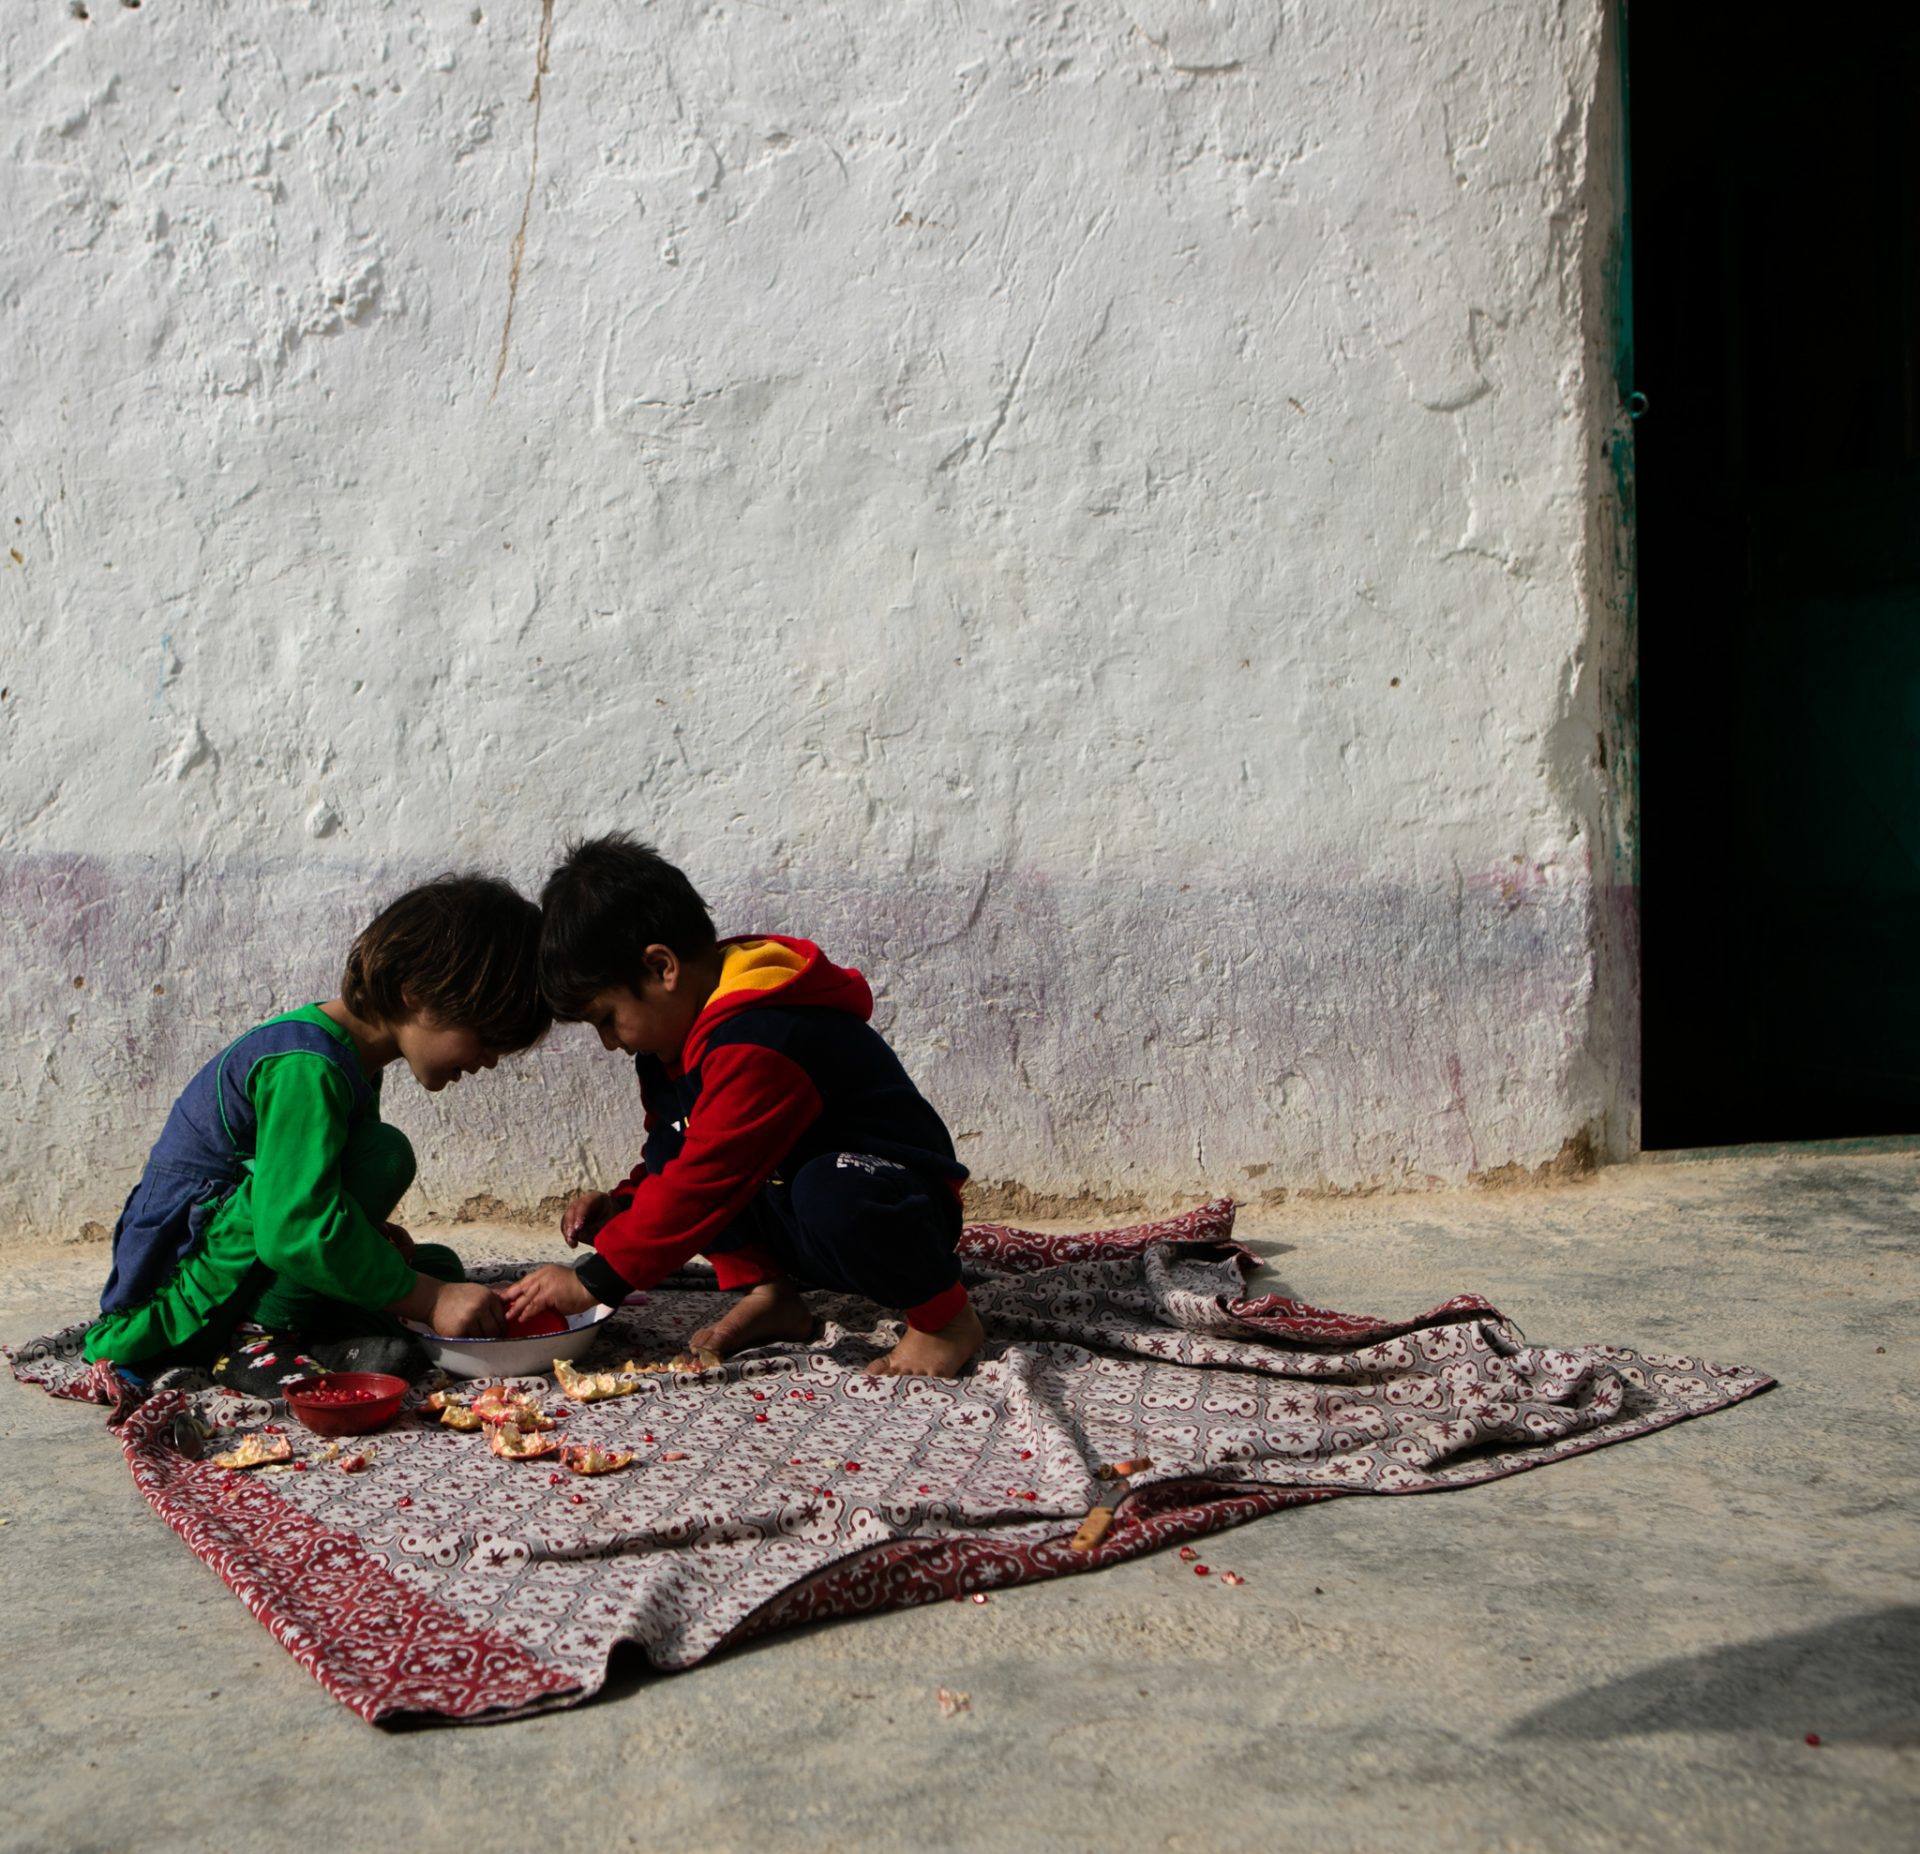 Two young children sat head to head on the floor outside their home in Afghanistan. They are sat on a patterned mat on hard floor.